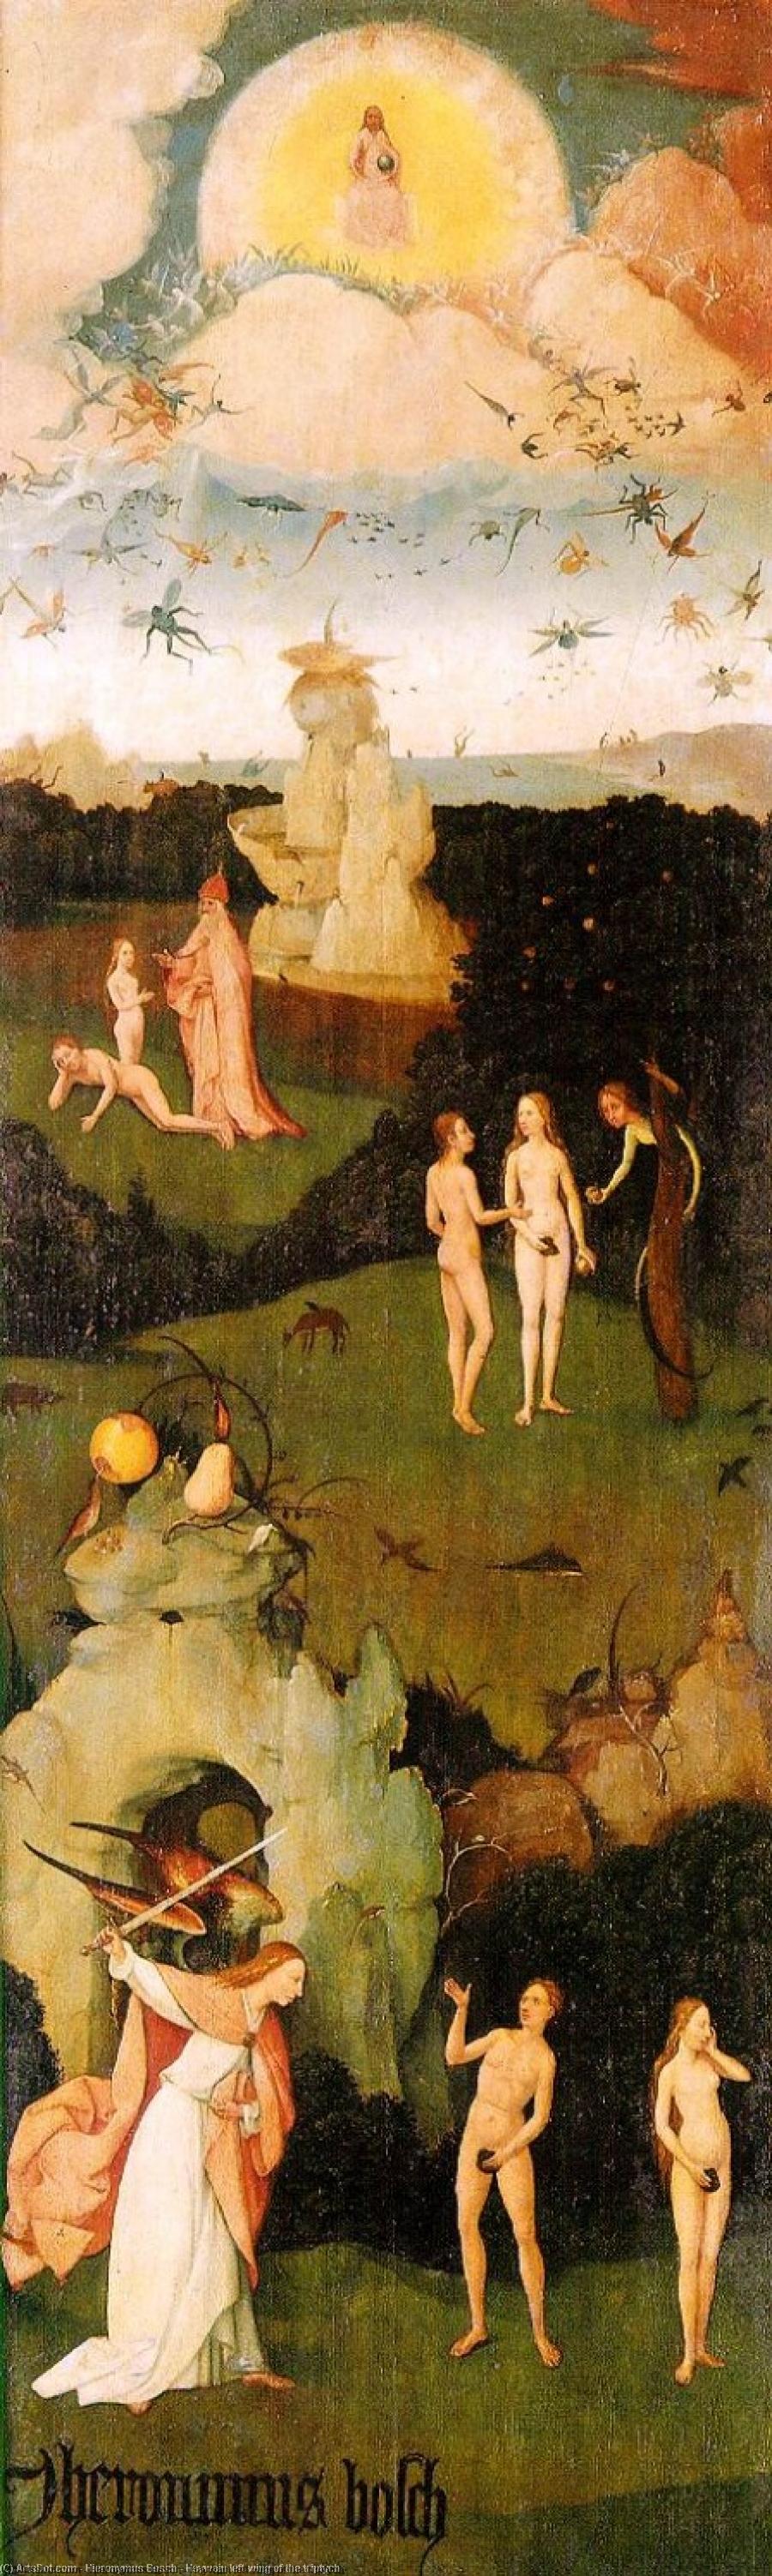 WikiOO.org - 백과 사전 - 회화, 삽화 Hieronymus Bosch - Haywain left wing of the triptych